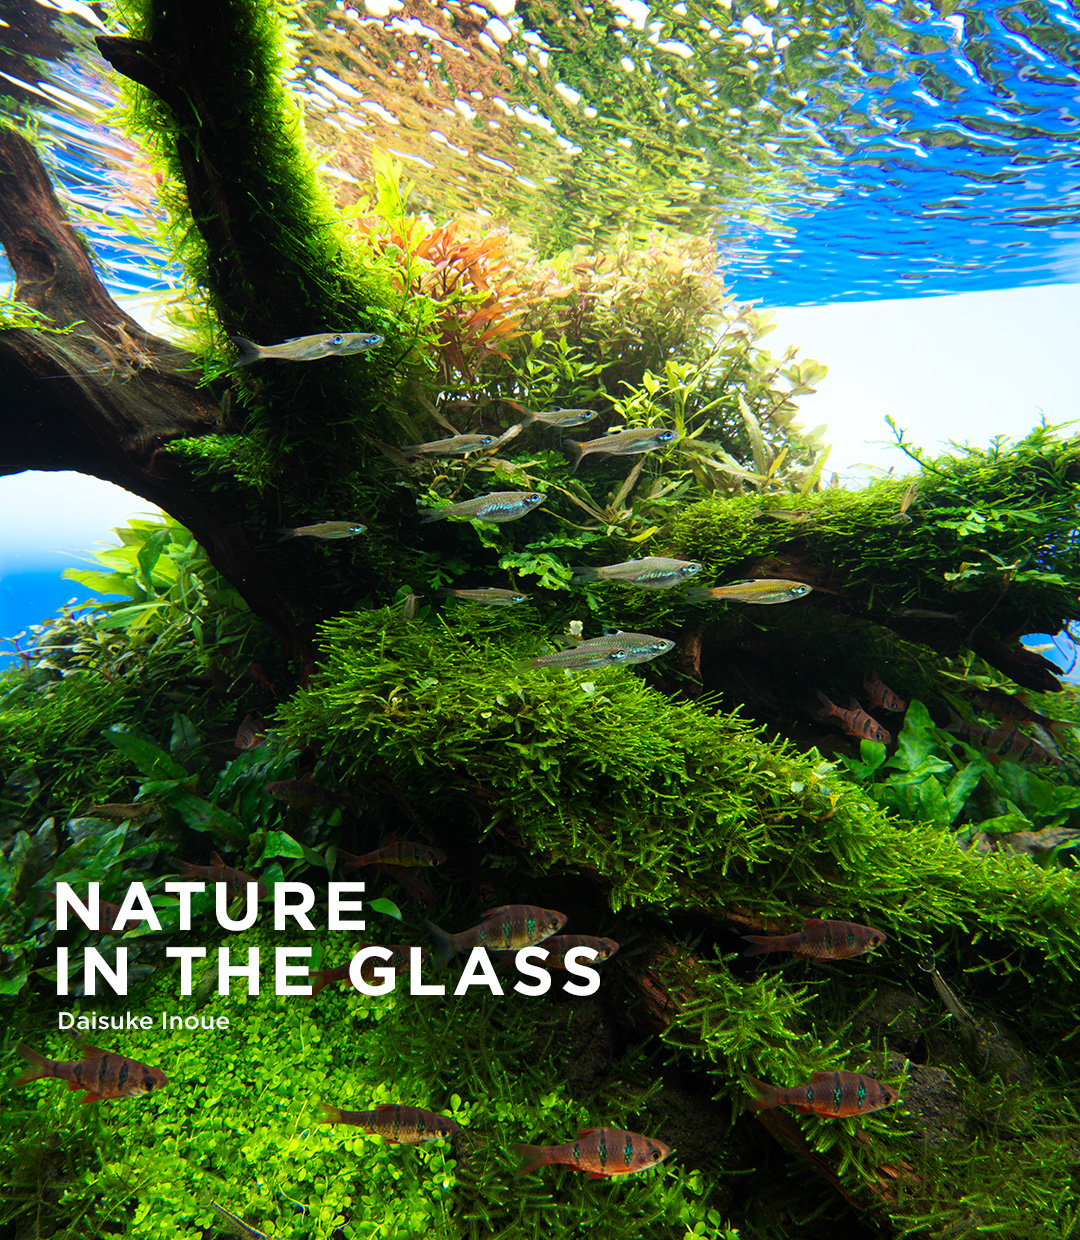 NATURE IN THE GLASS “World Tree”